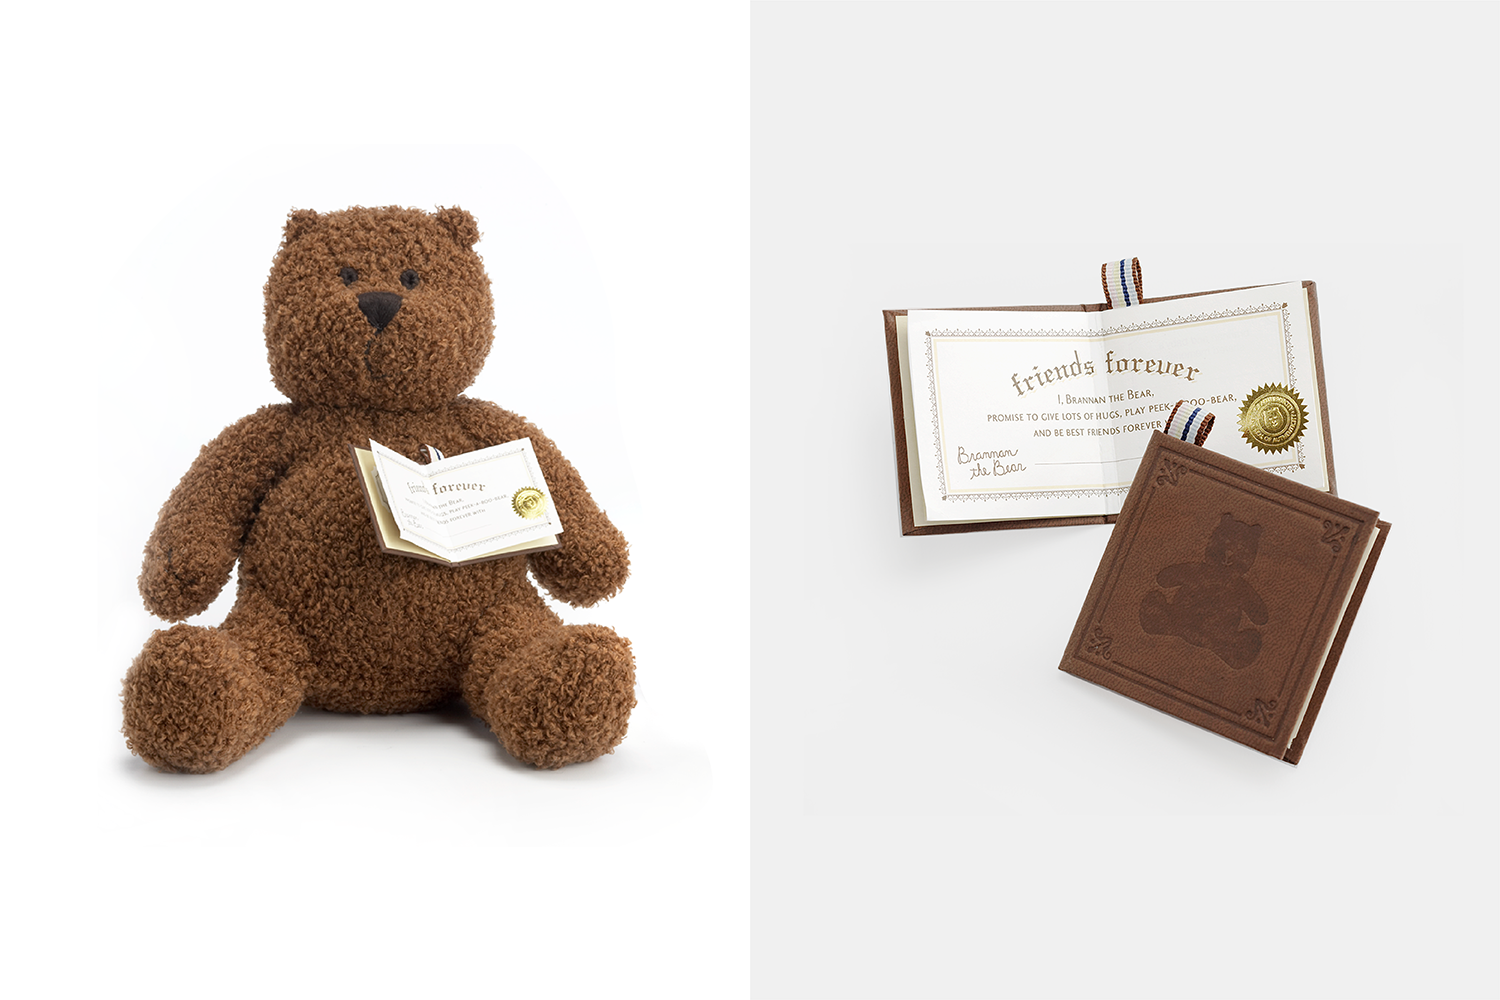 Baby Gap's Brannon the Bear with certificate of ownership.